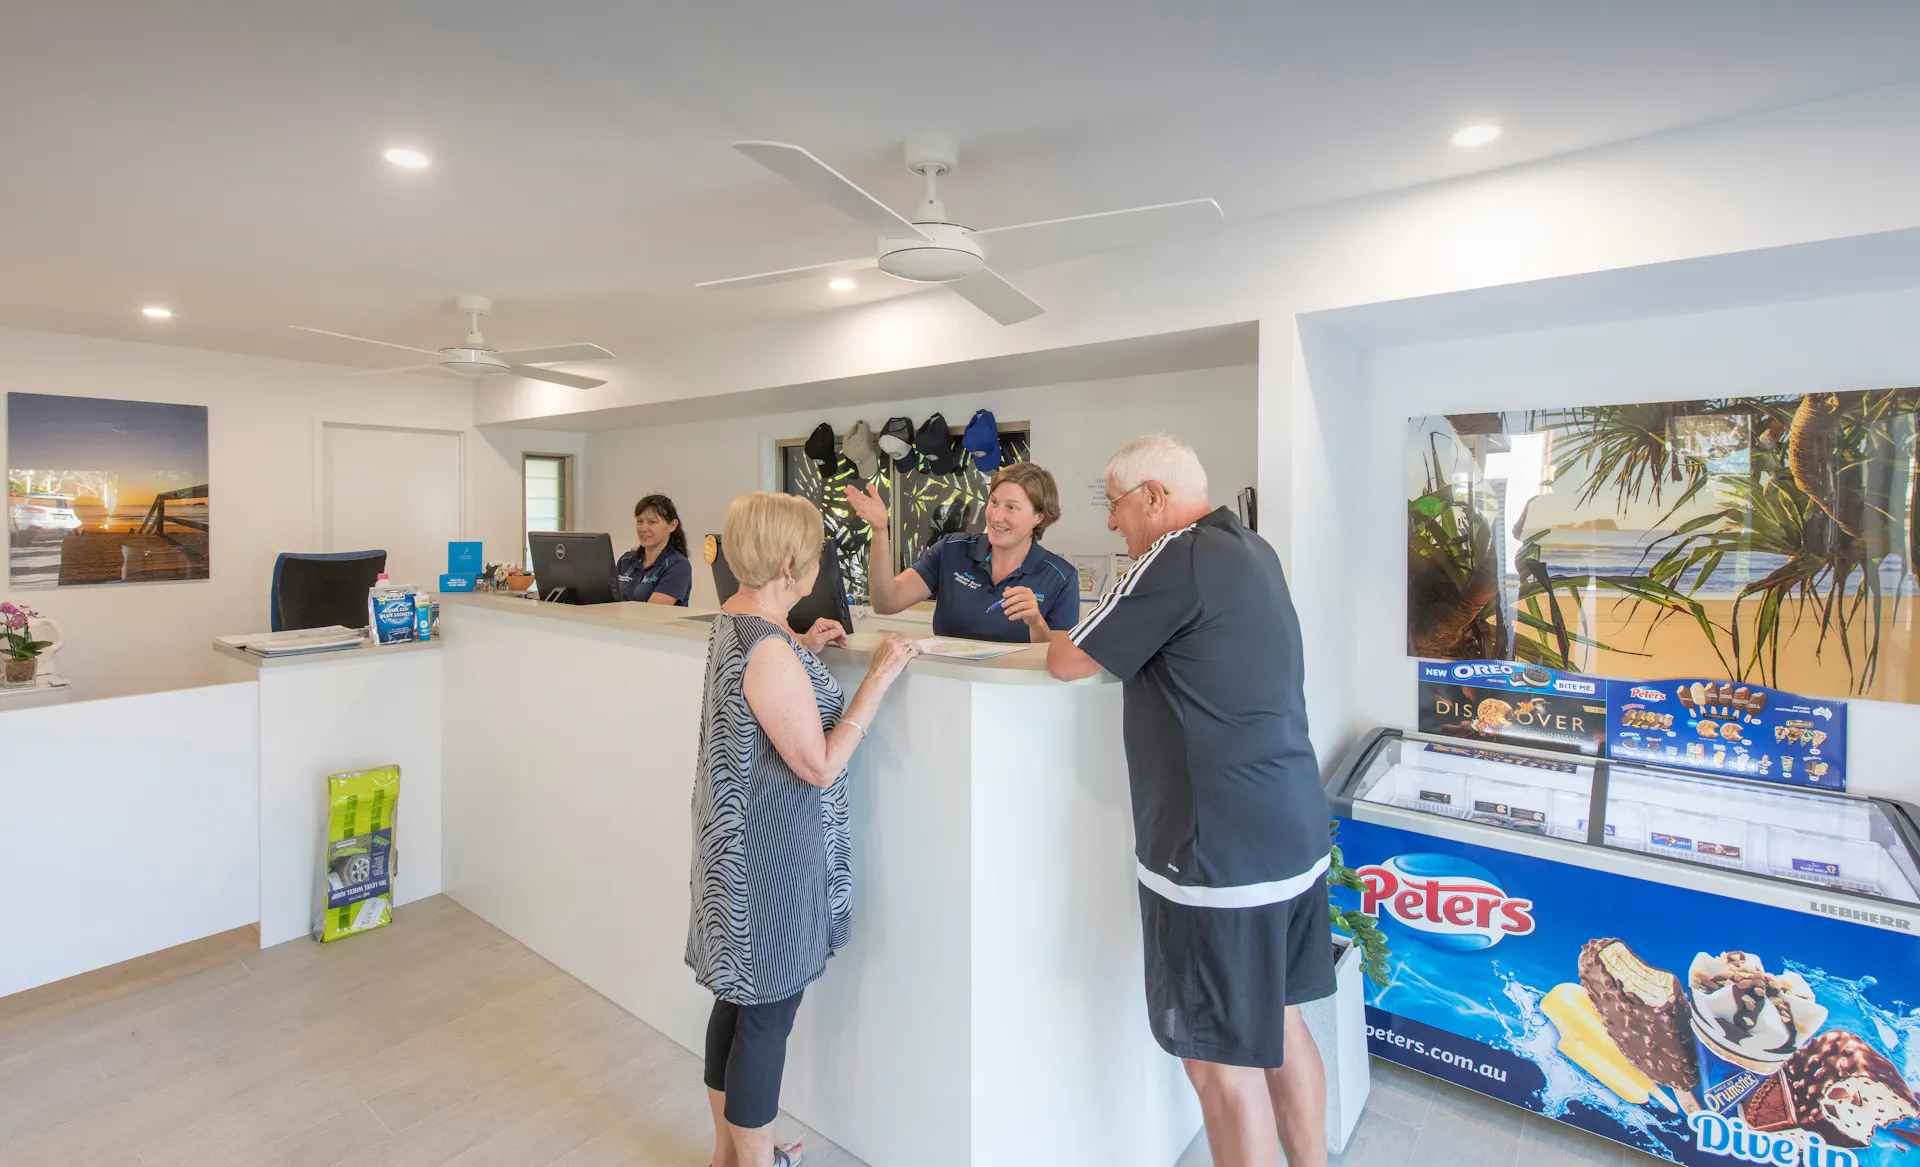 Image of Mudjimba Beach Holiday Park Office with staff and guests checking in